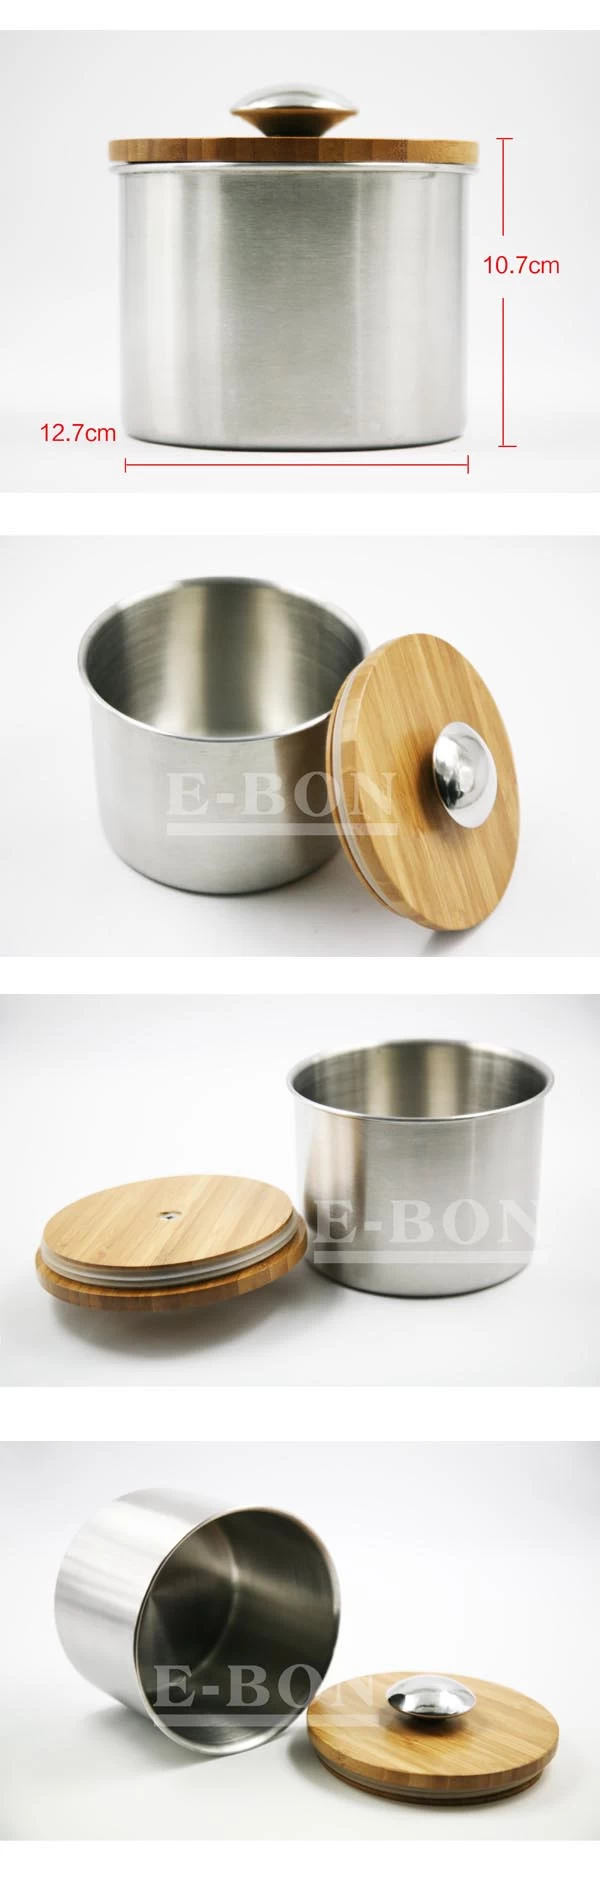 Stainless Steel Storage Pot/ Can/ Jar with Wooden Lid